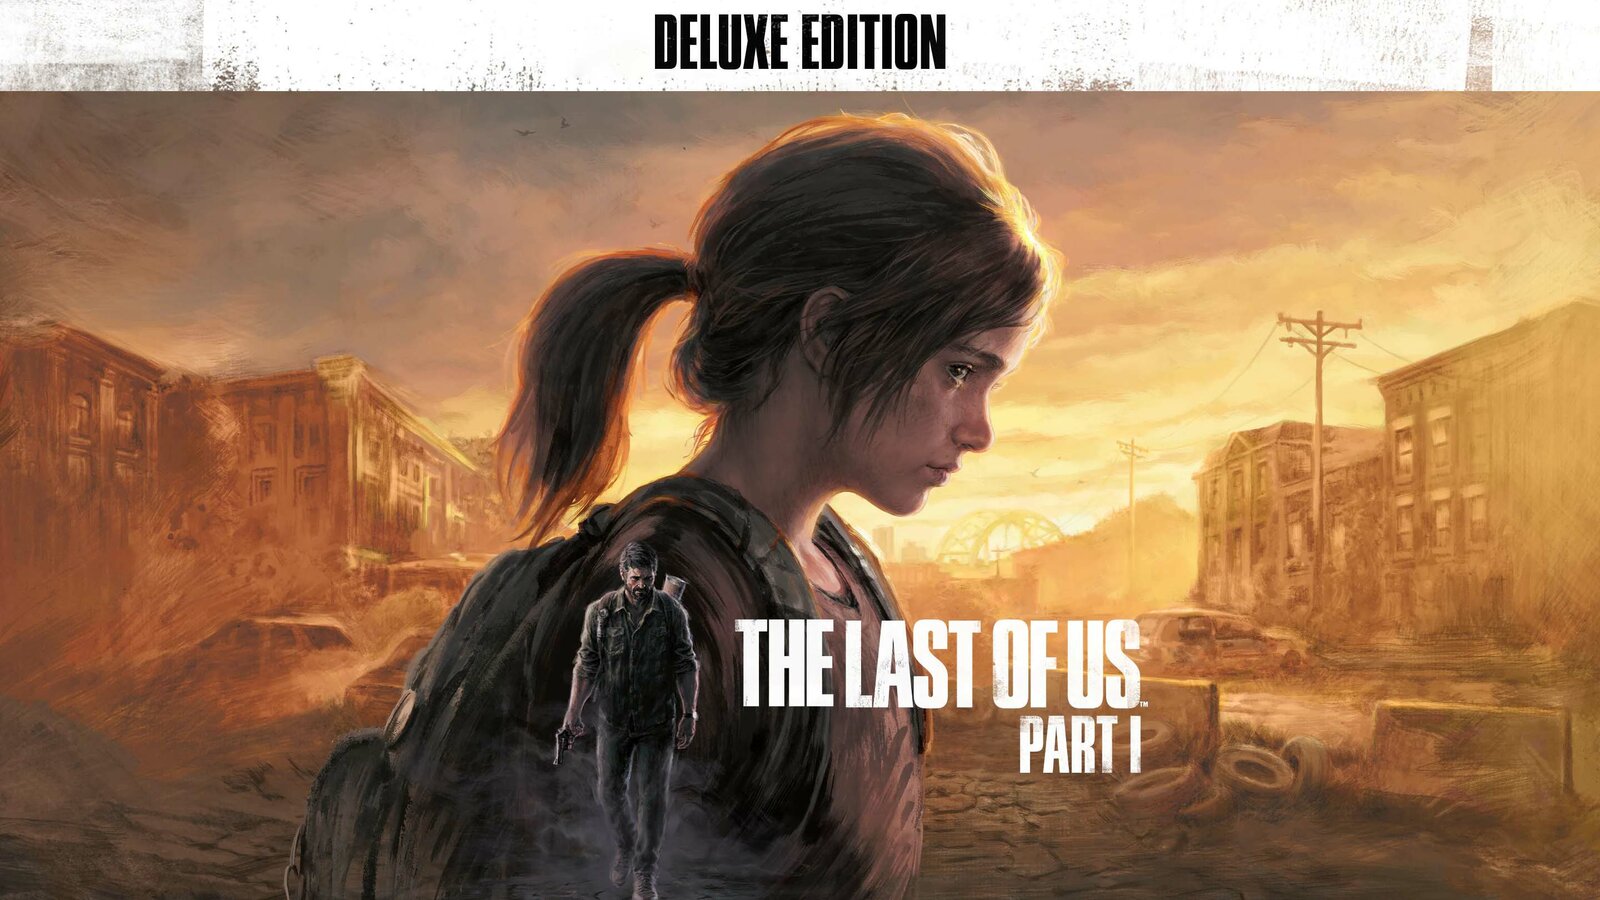 The Last of Us: Part I - Deluxe Edition